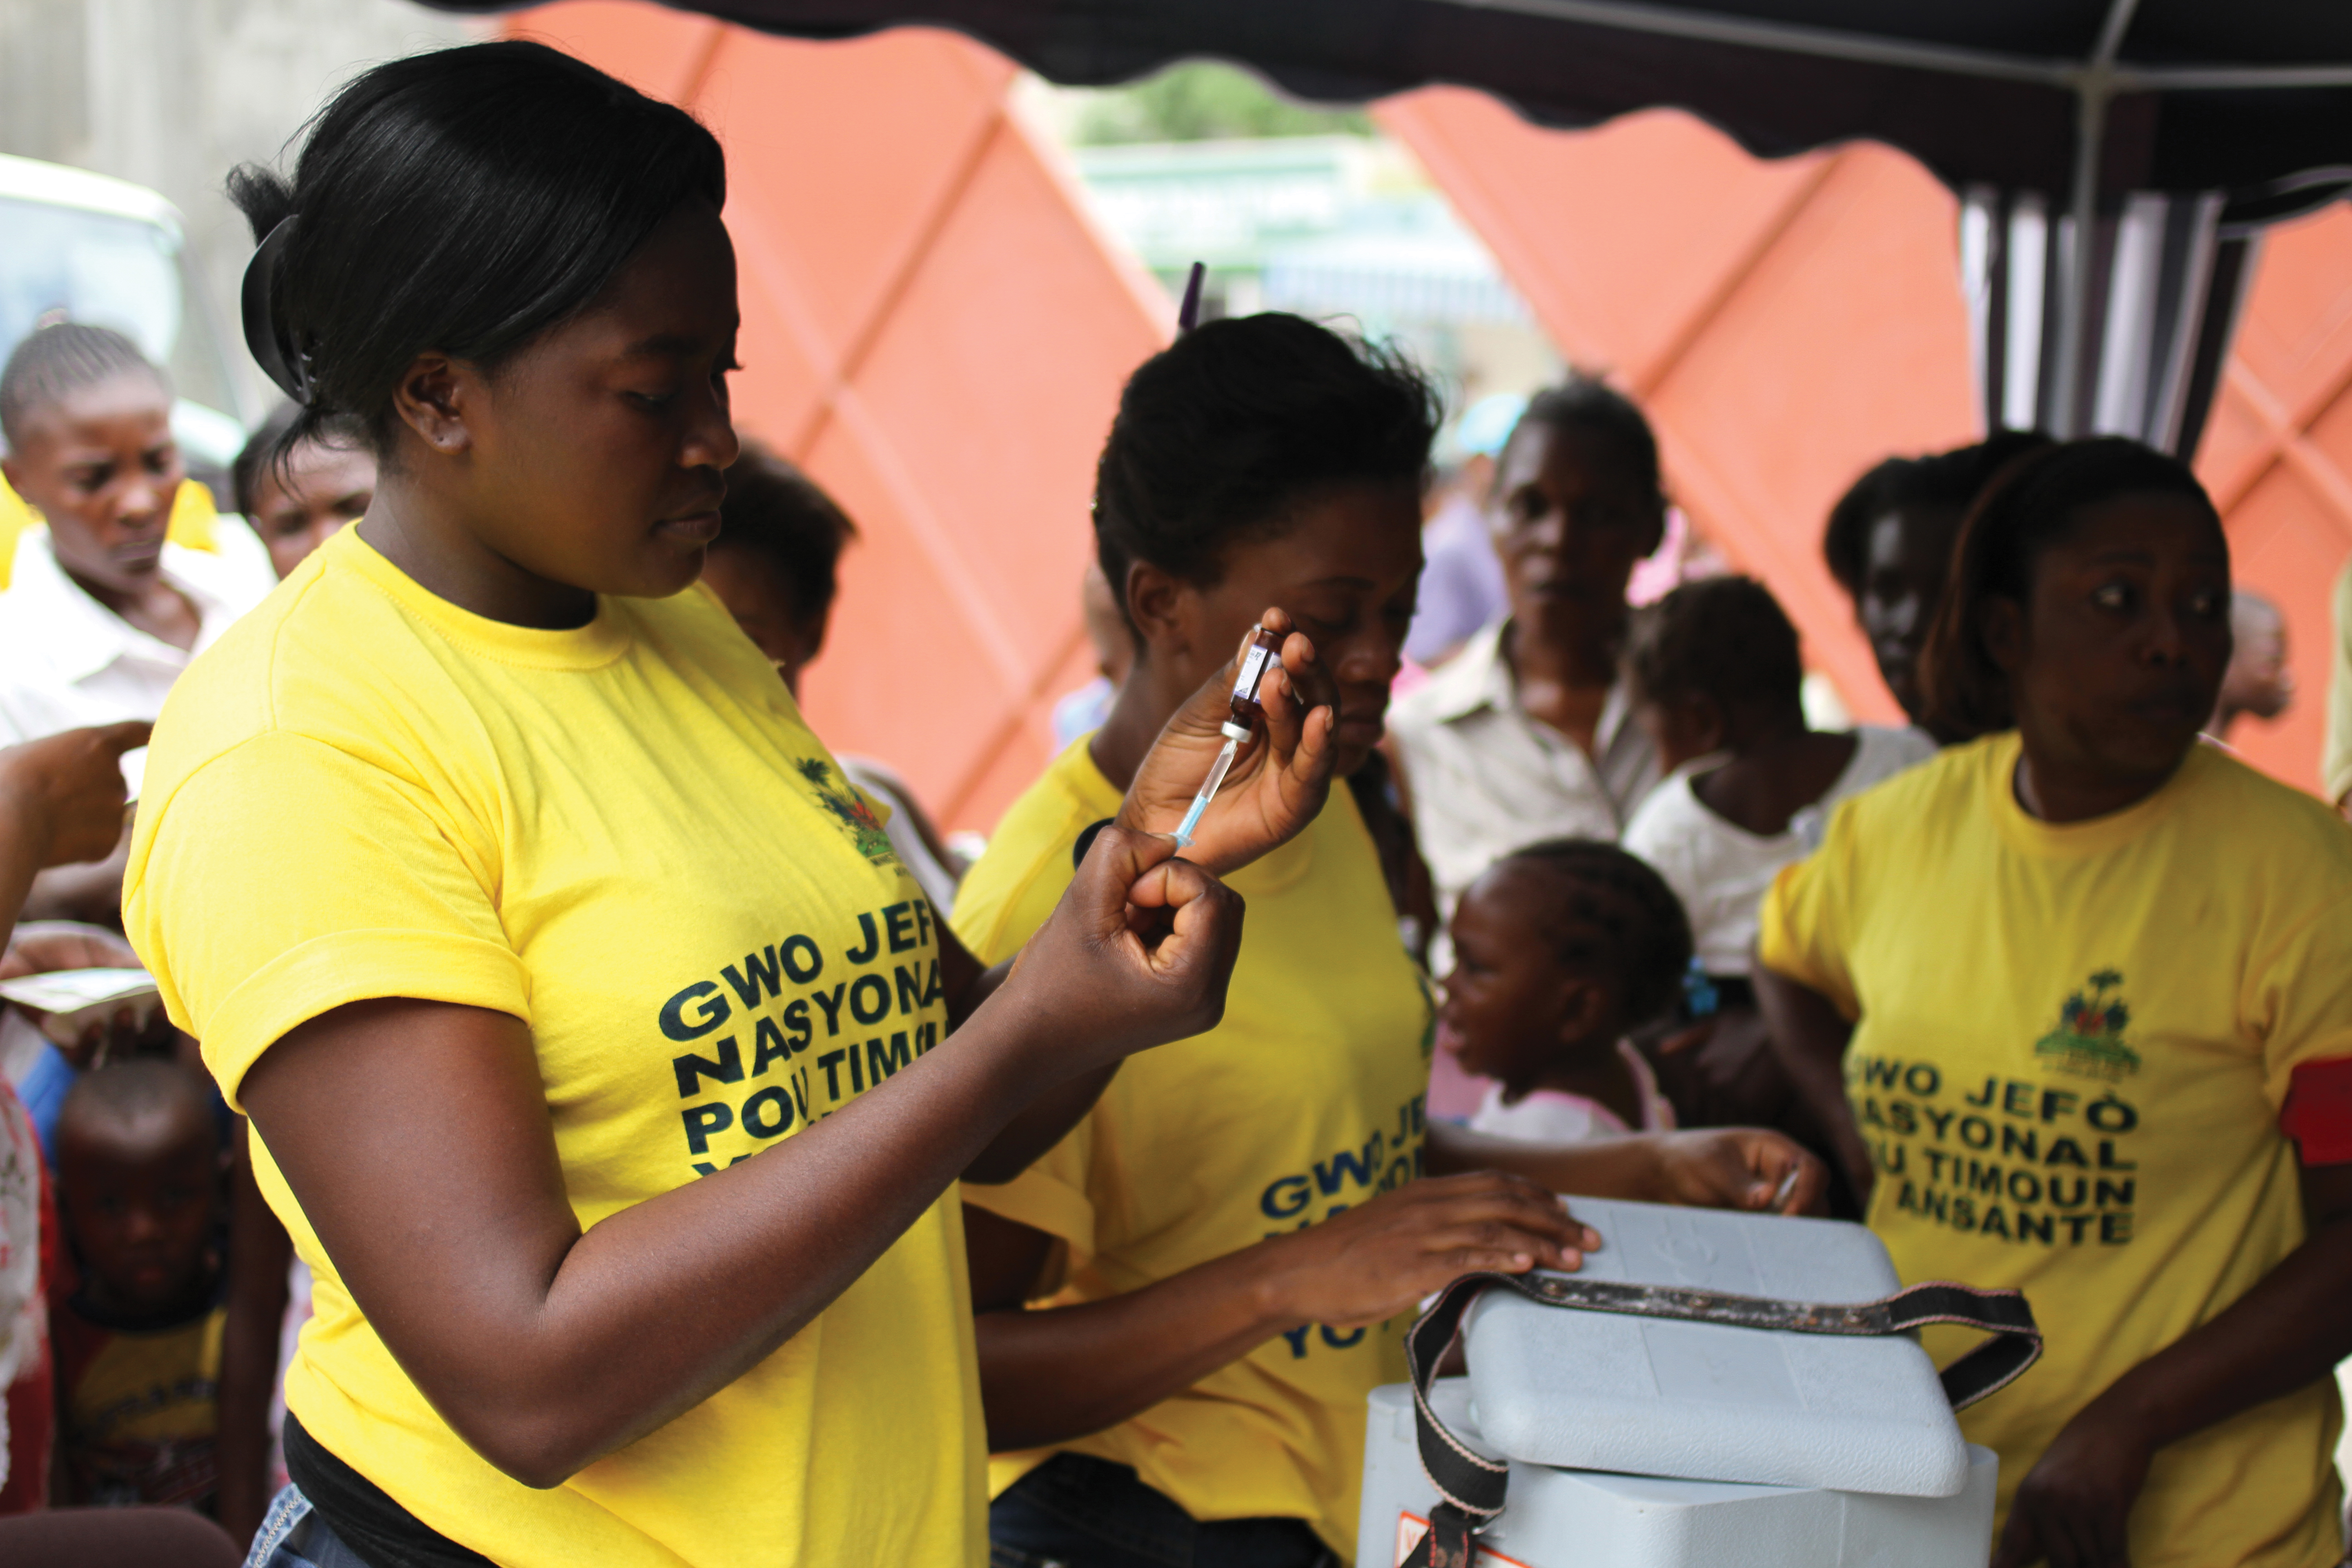 A Haitian woman in a yellow shirt holding a vaccine bottle upside down and filling a syringe while standing near other women.